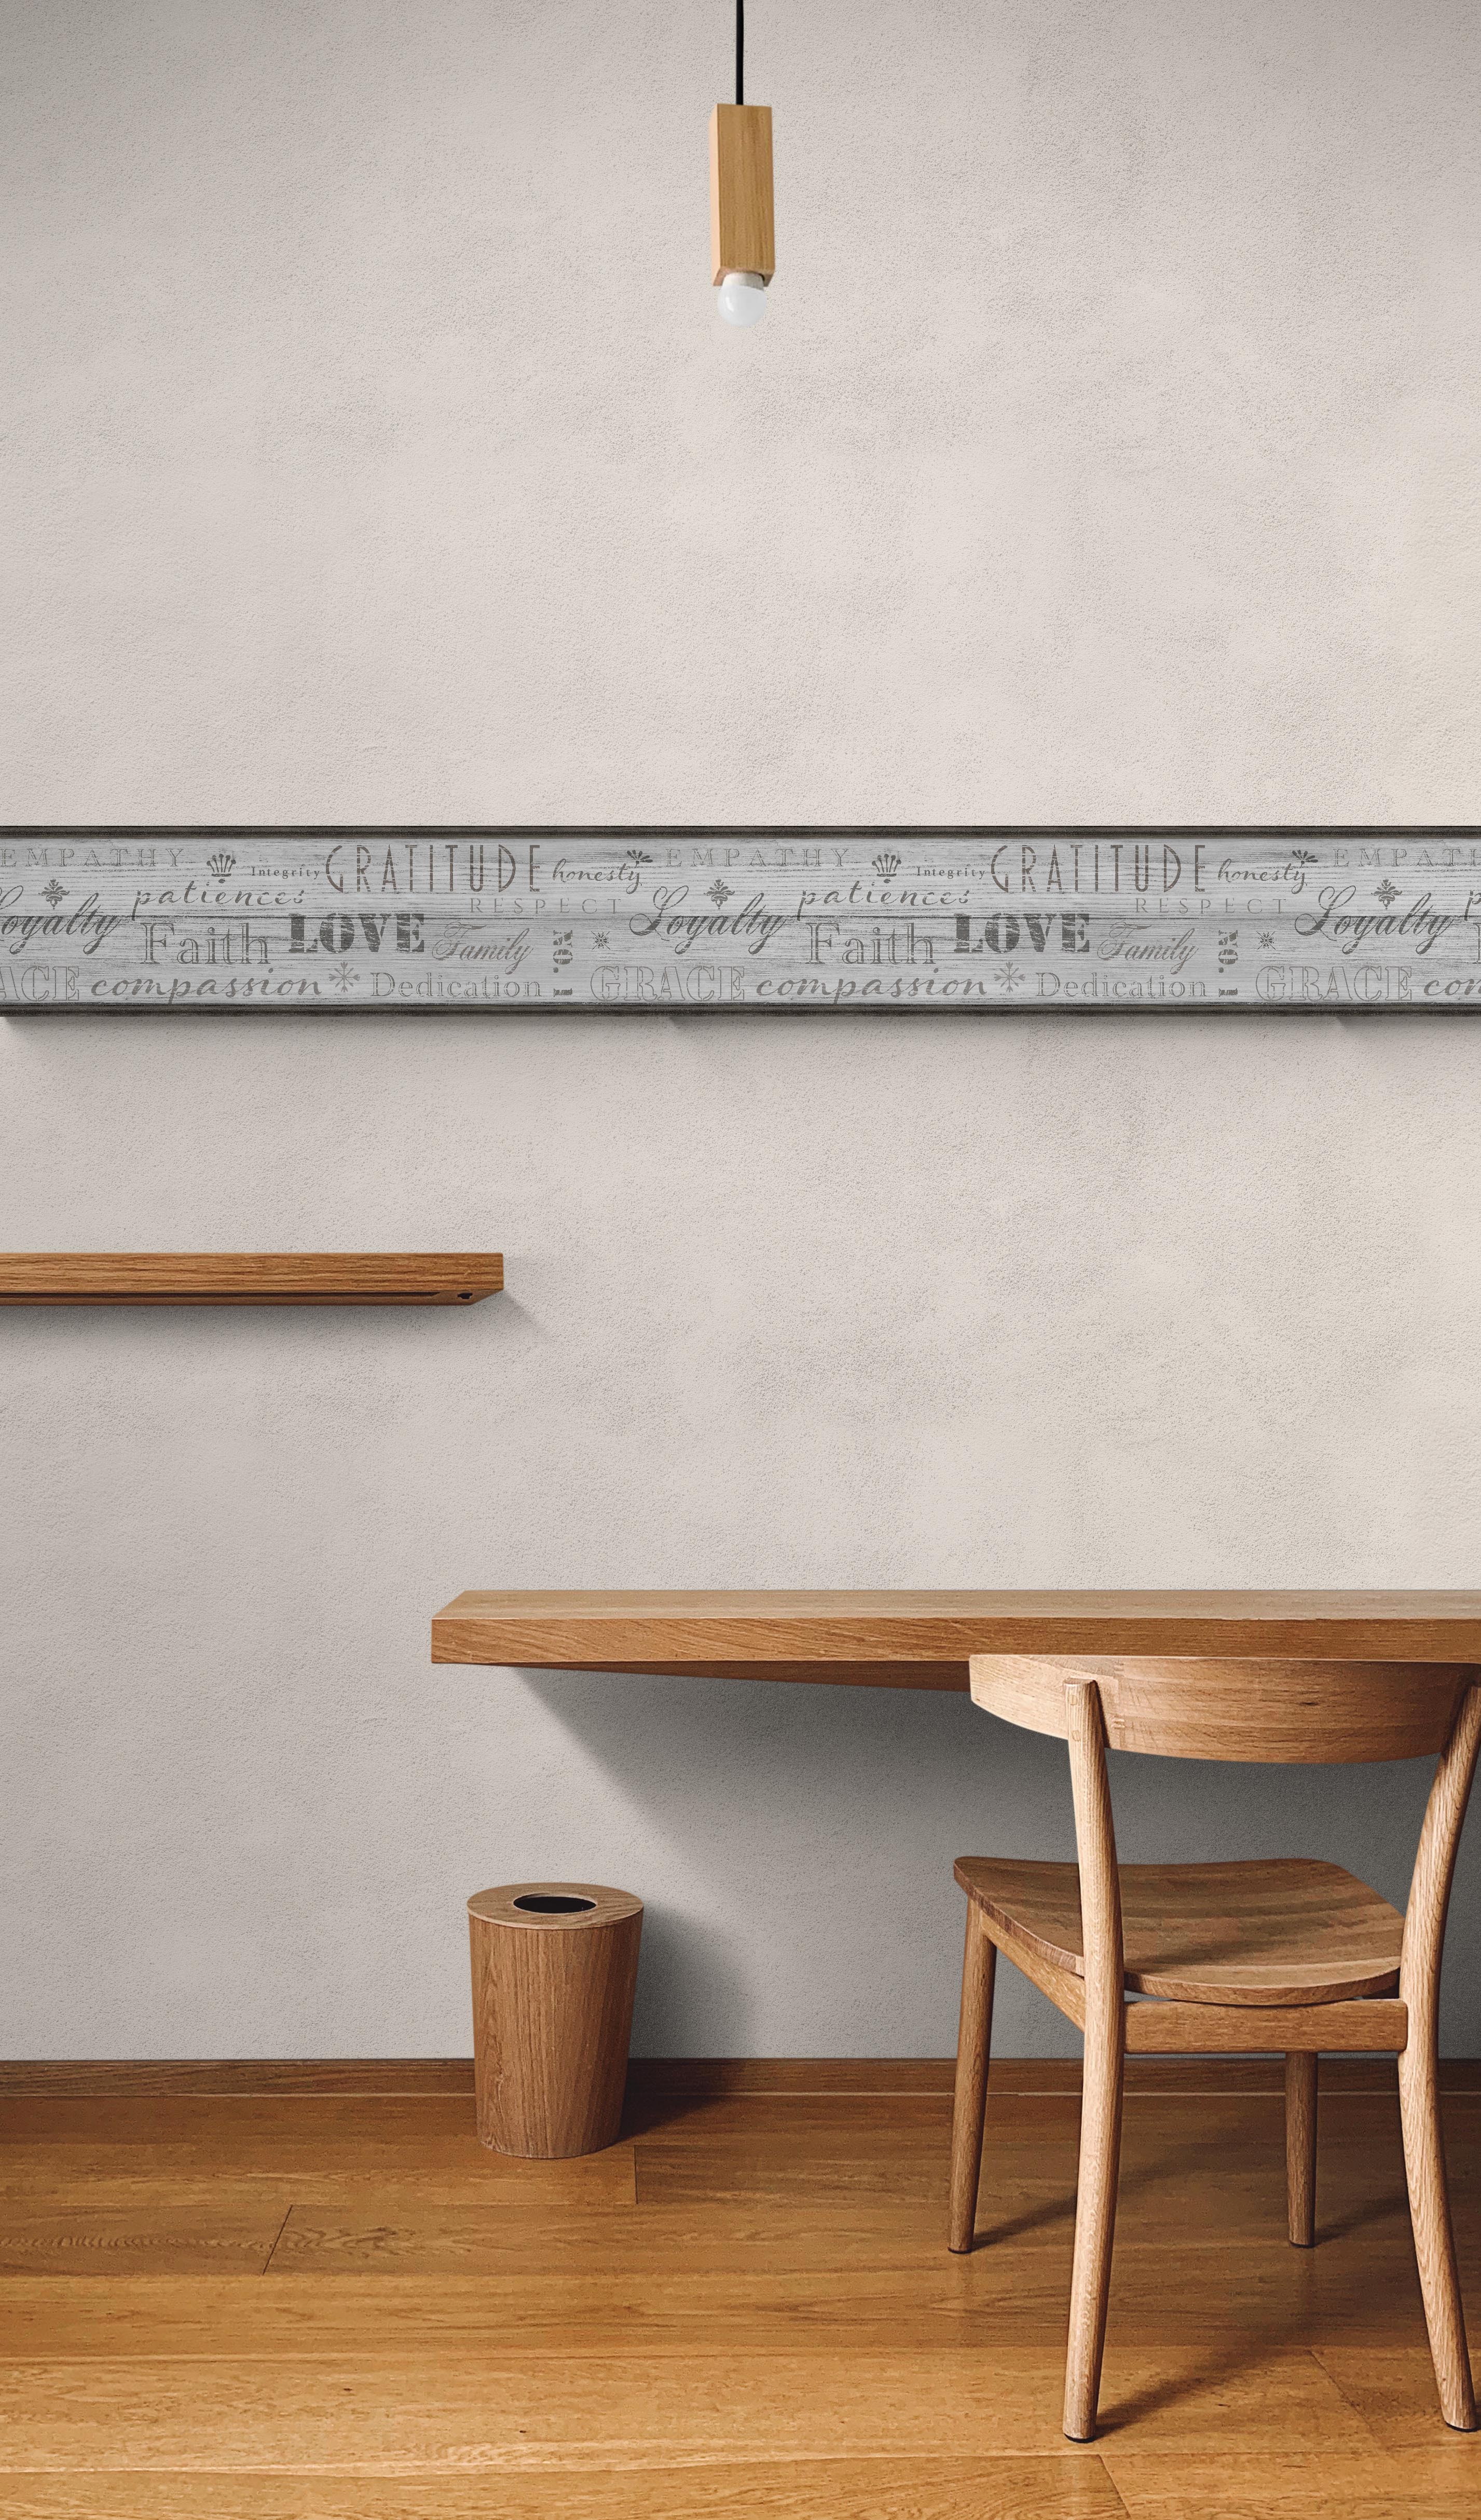 GB4033 Farmhouse Values Typography Inspirational Words Distressed Wood Peel and Stick Wallpaper Border 10in or 8in Height x 15ft Long, Soft Gray Neutral Off White